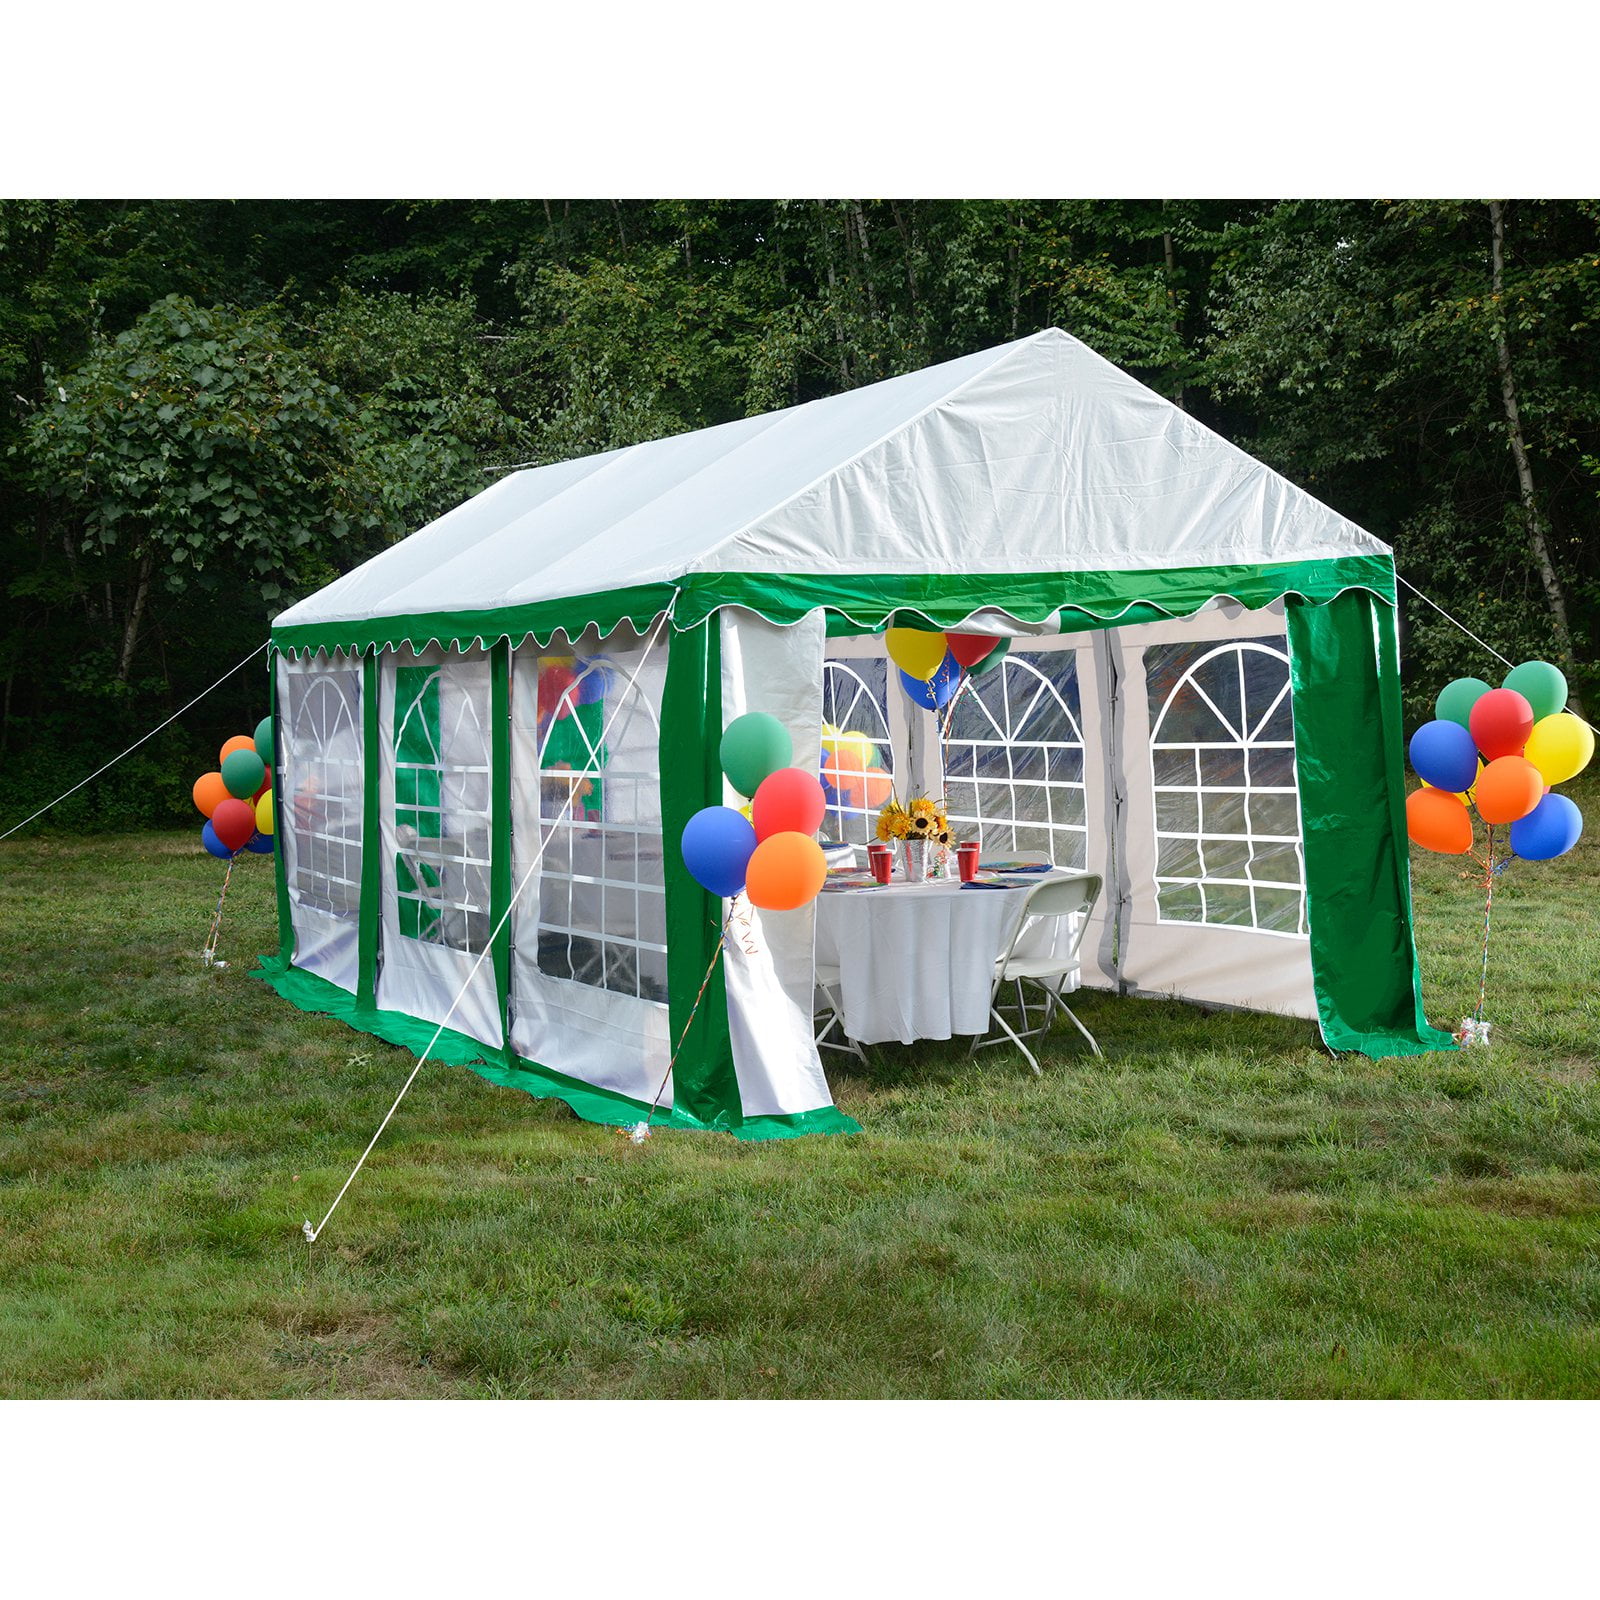 Enclosure Kit with Windows for Party Tent 10' x 20'3m x 6m, GreenWhite ...